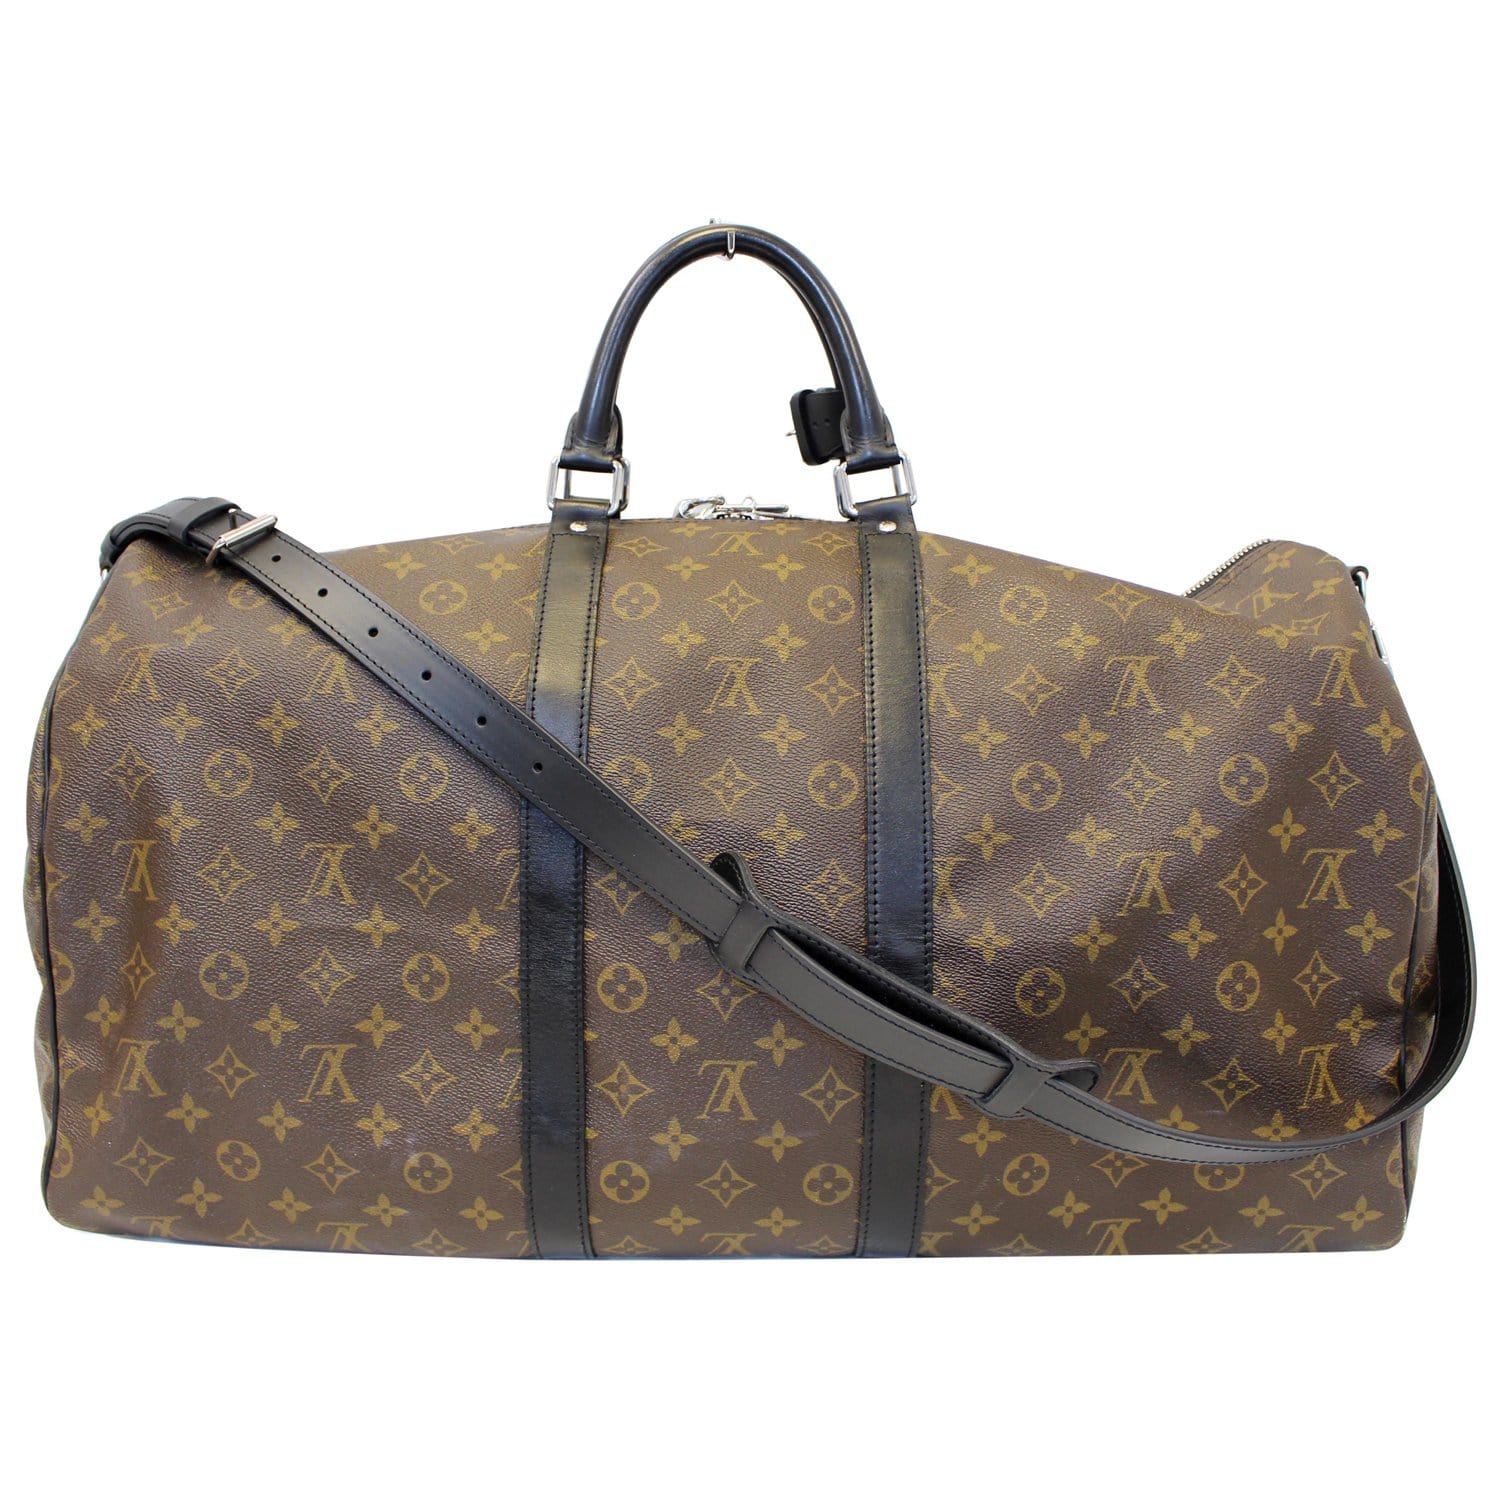 Louis Vuitton 2010 pre-owned Keepall 55 Bandouliere Holdall Bag